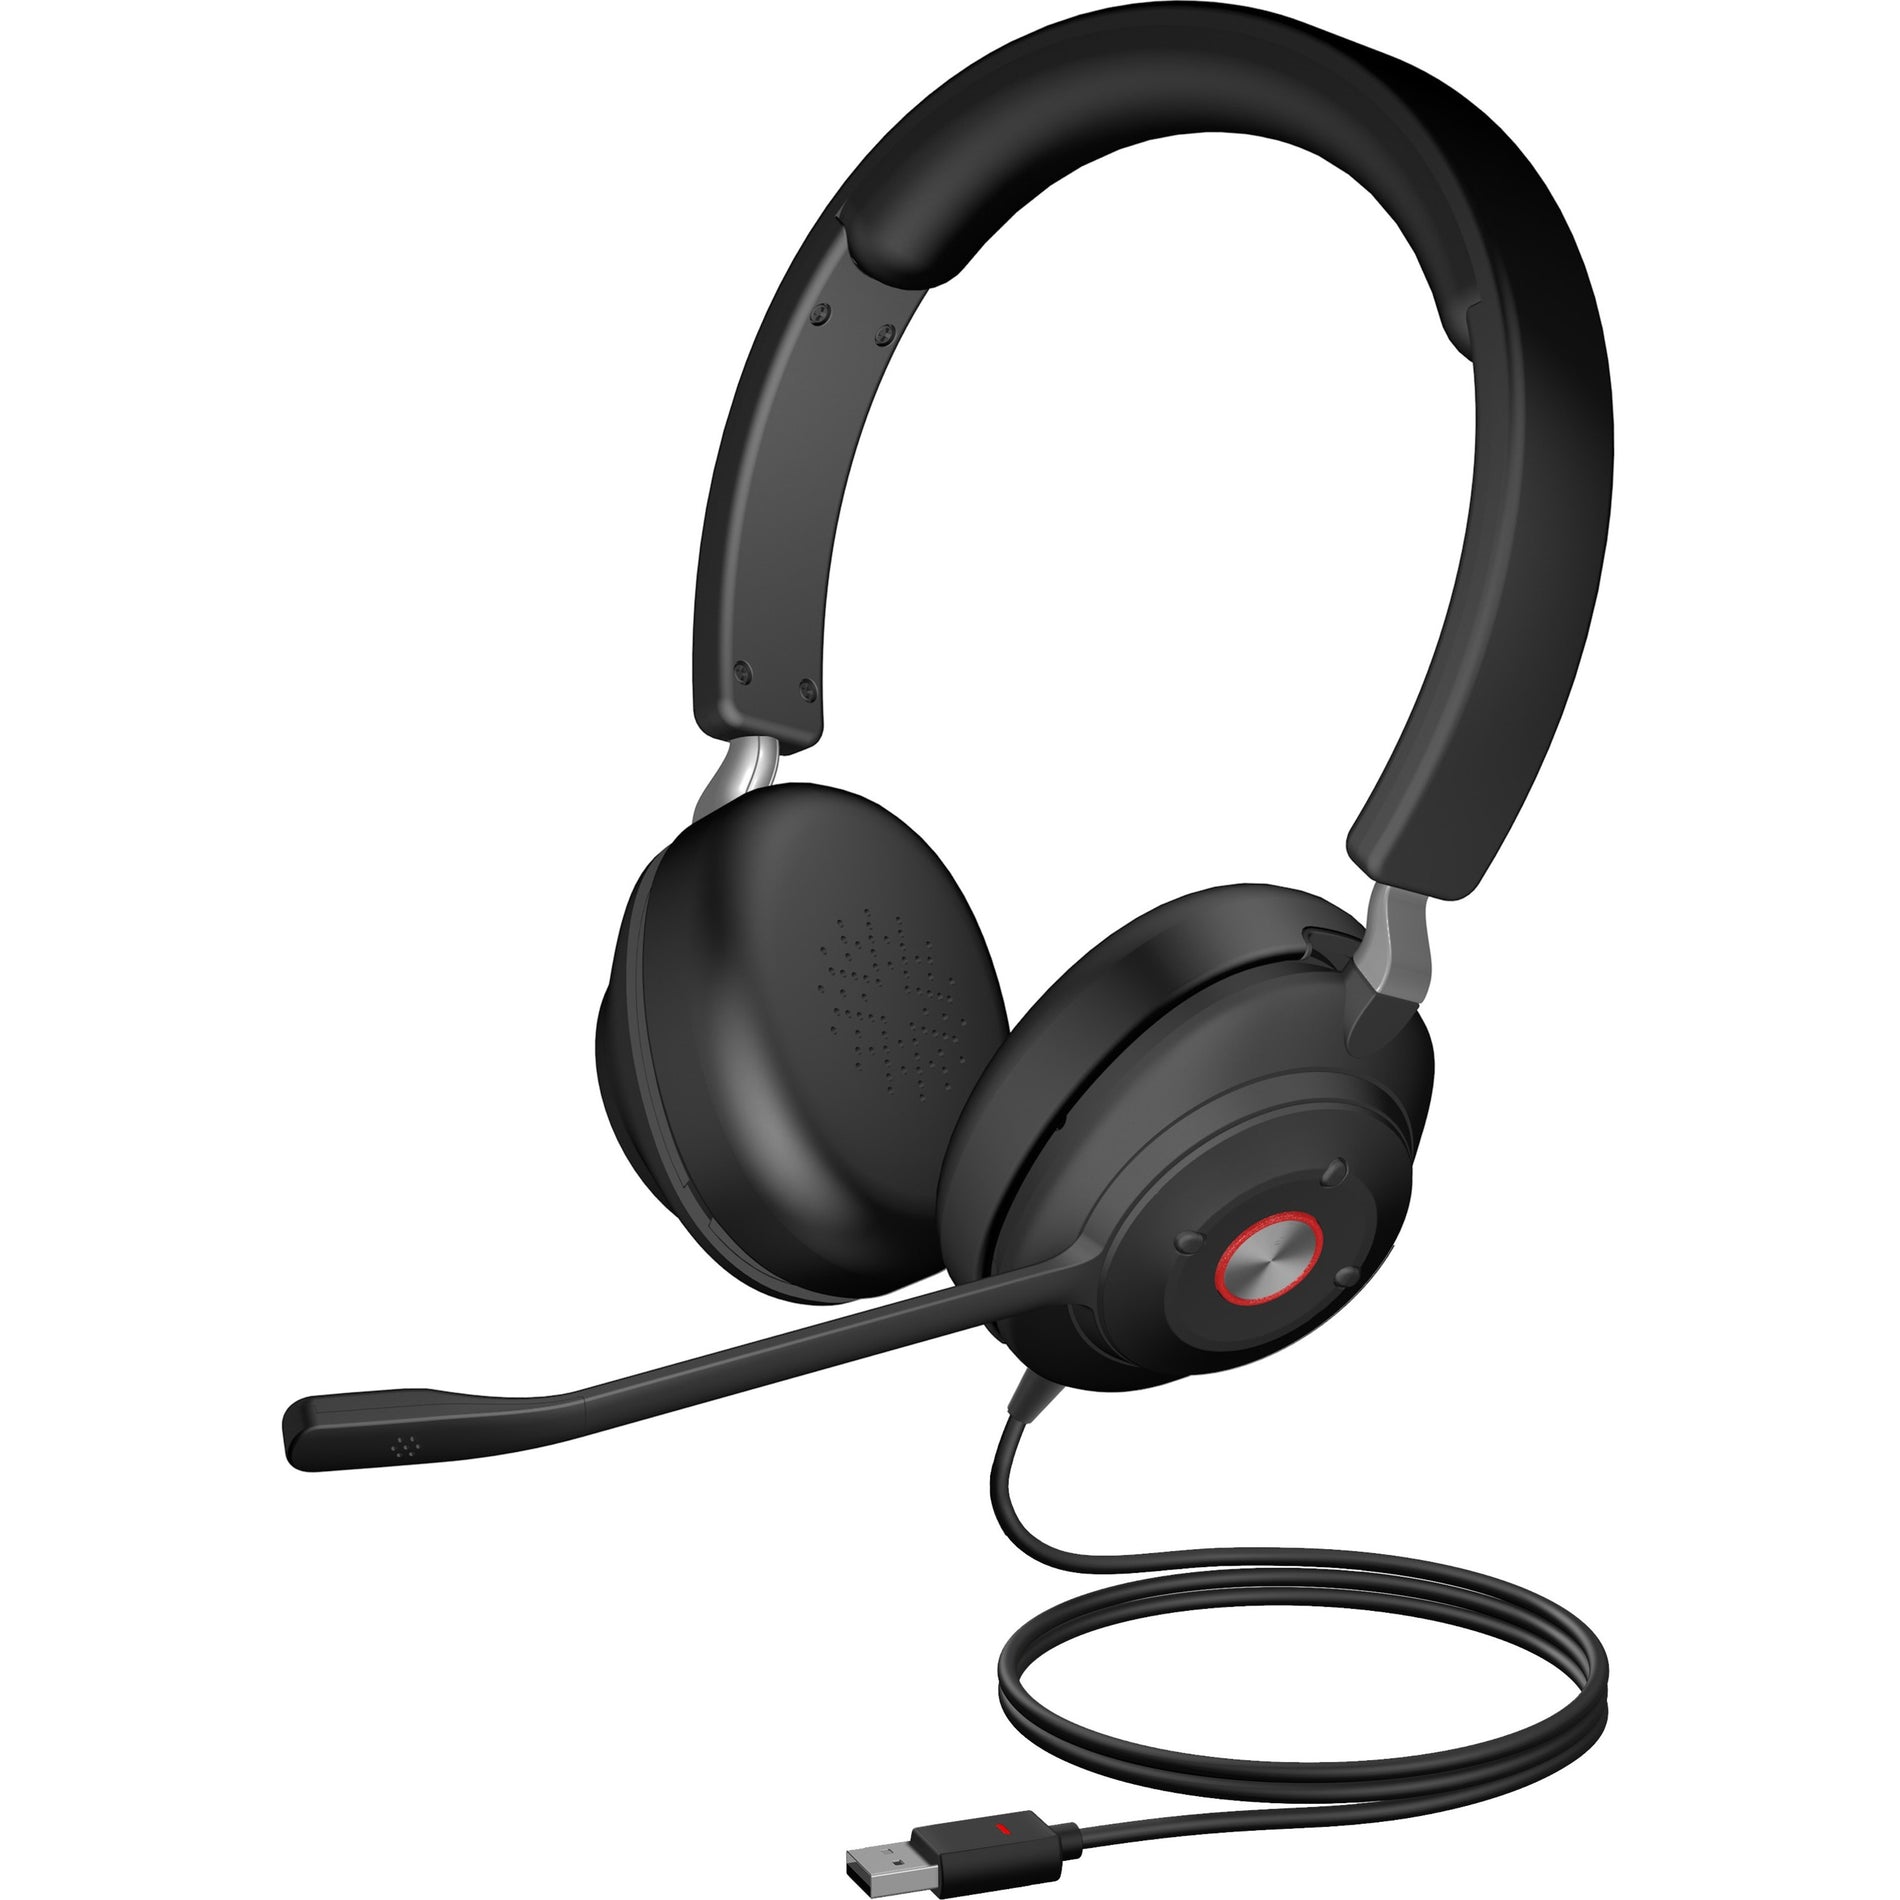 Cyber Acoustics HS-2000 Essential USB Computer Headset, Tangle-free Cable, Secure Fit, Passive Noise Cancellation